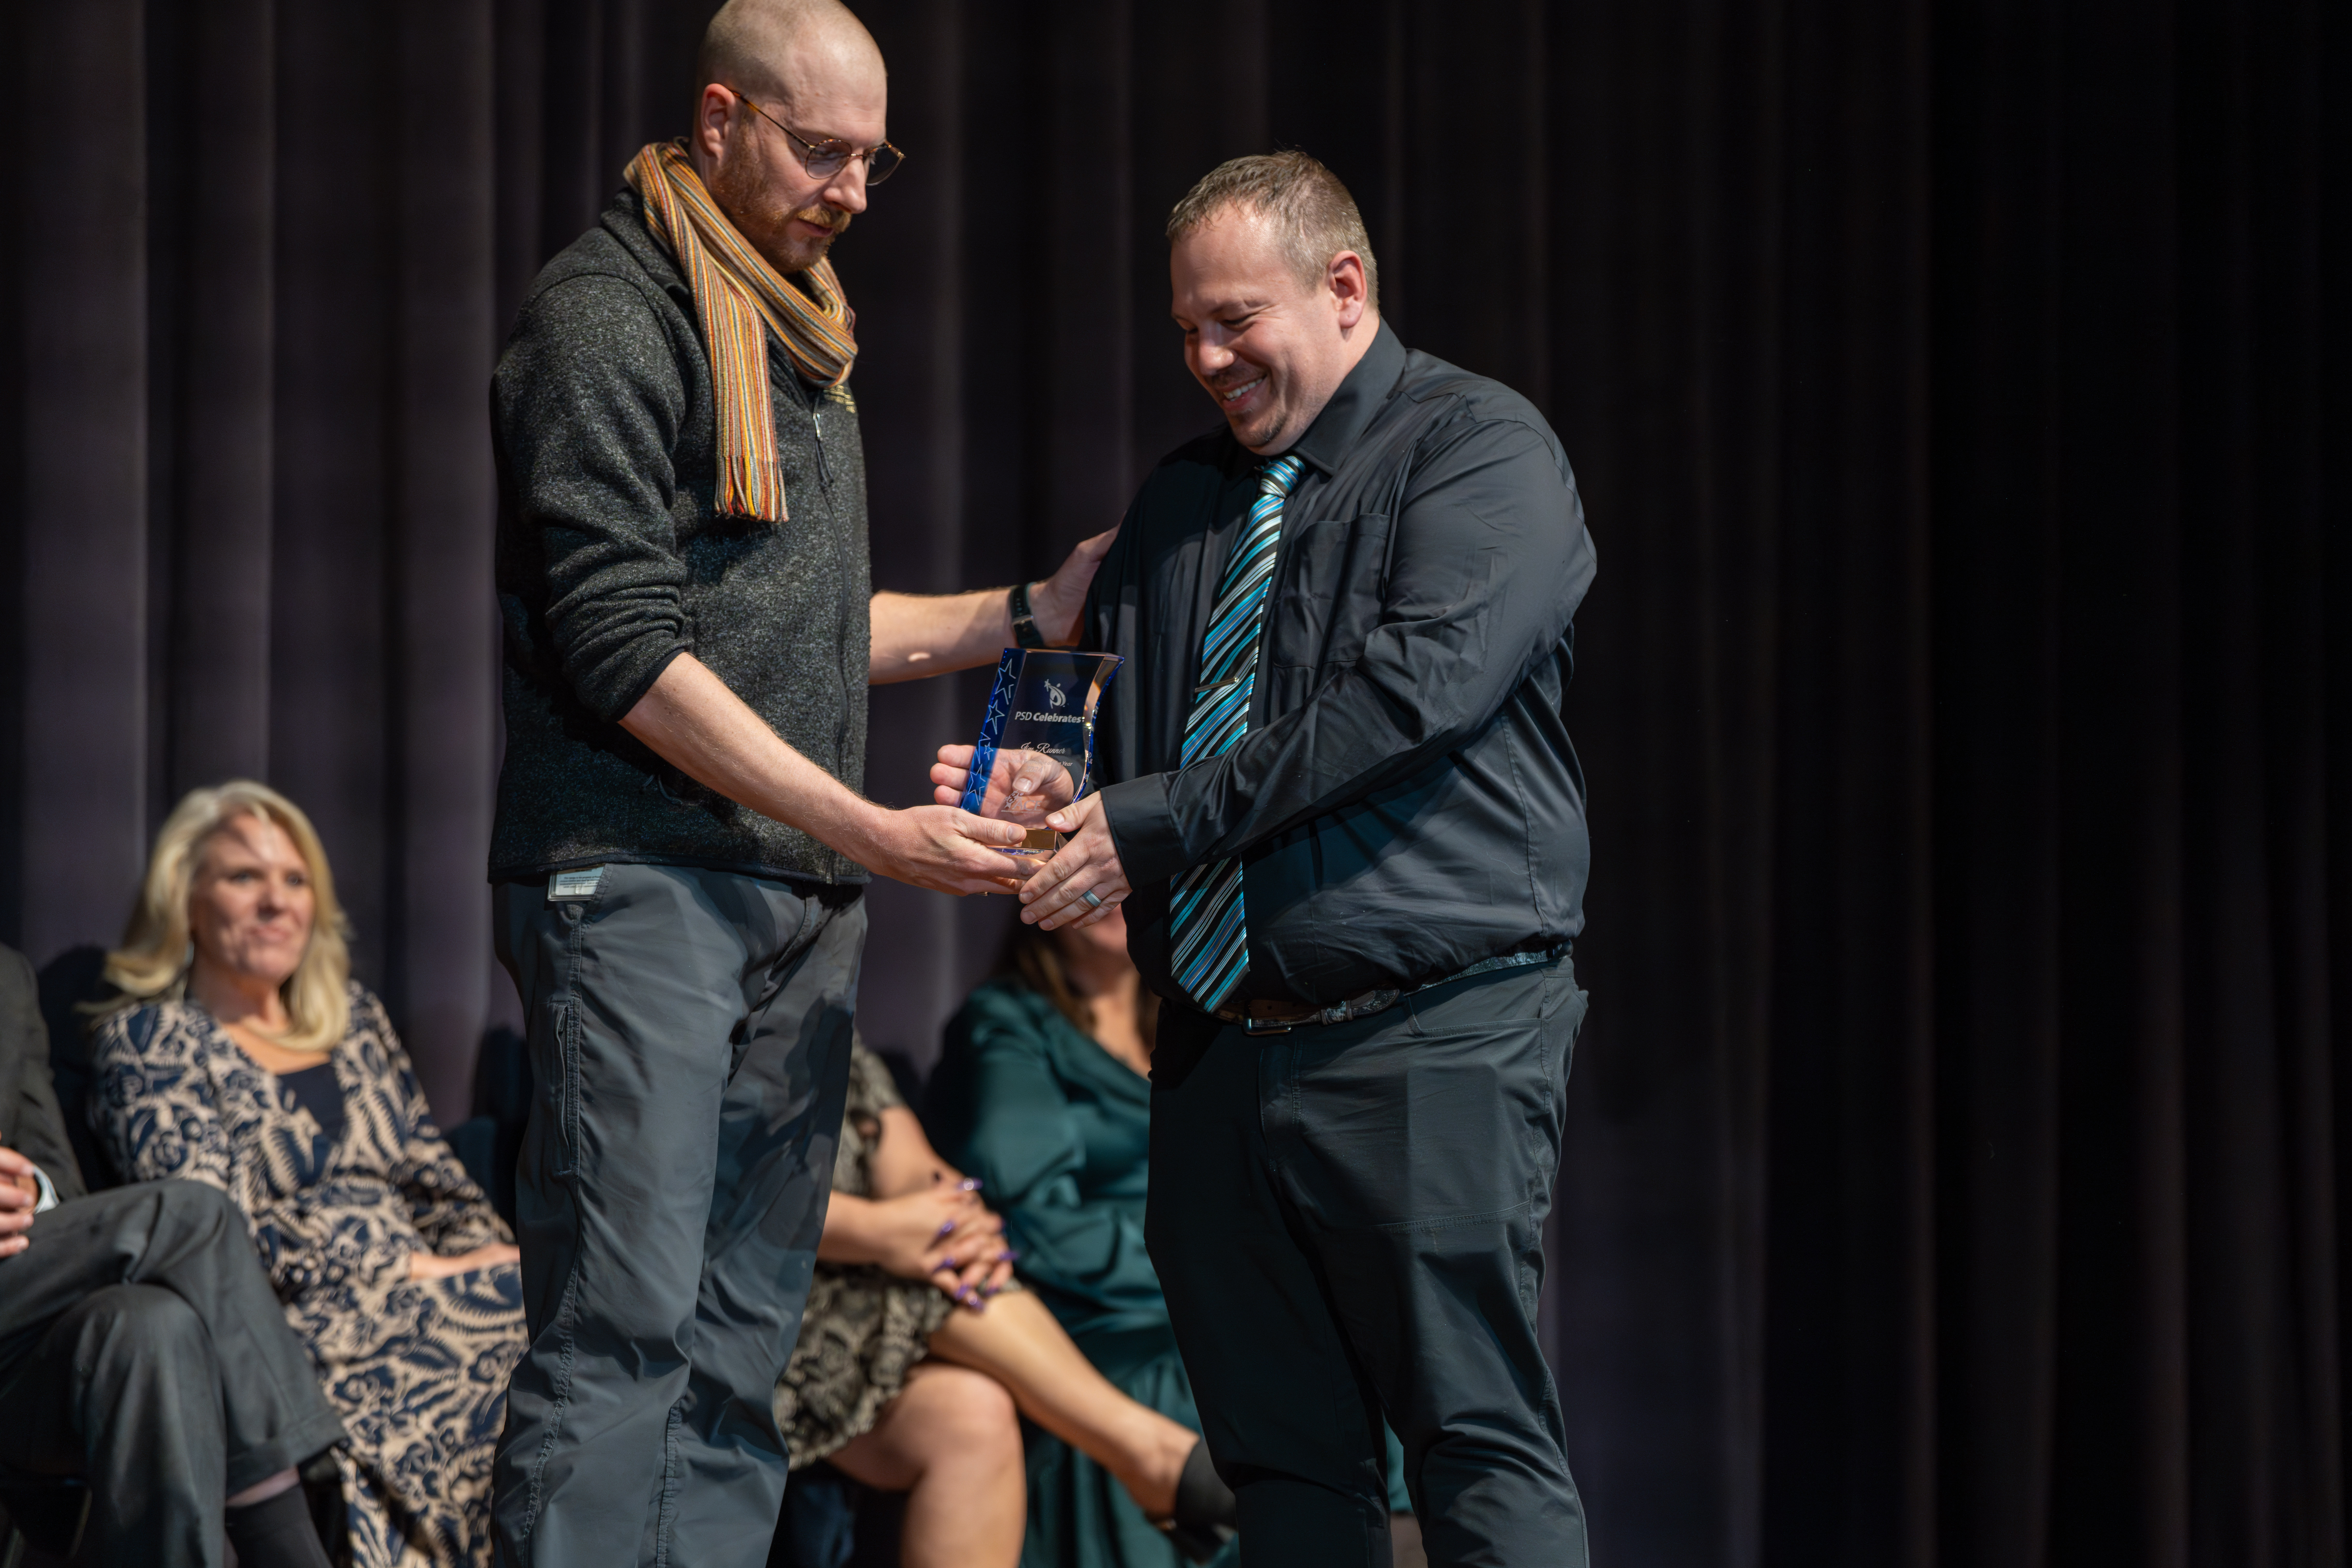 PSD staff ACE award winner receives recognition.